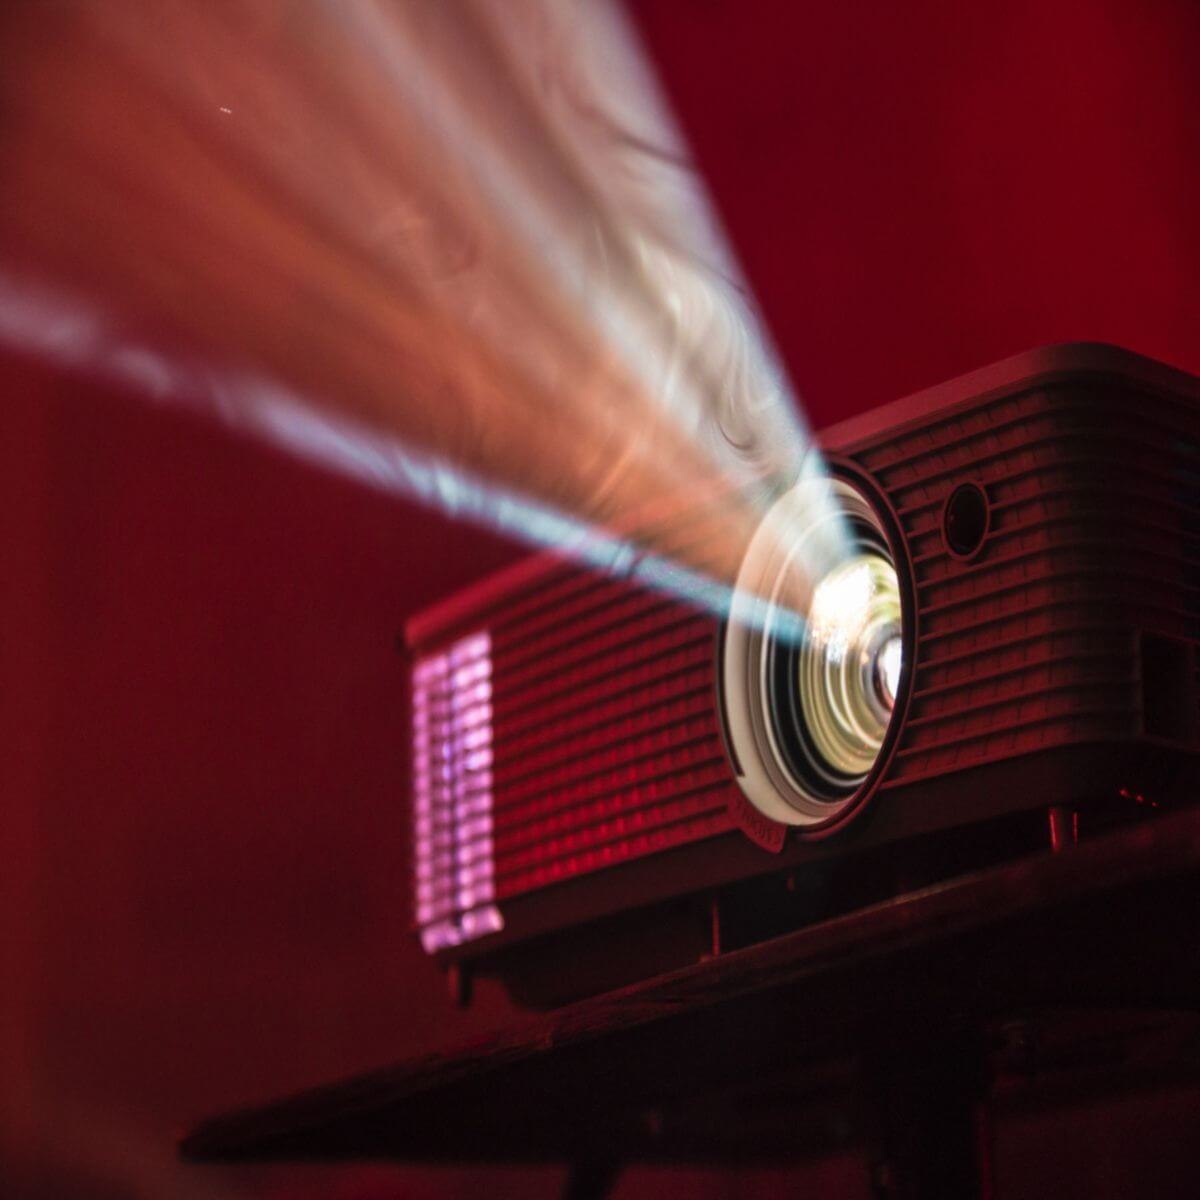 4 ways to fix Projector focus issues